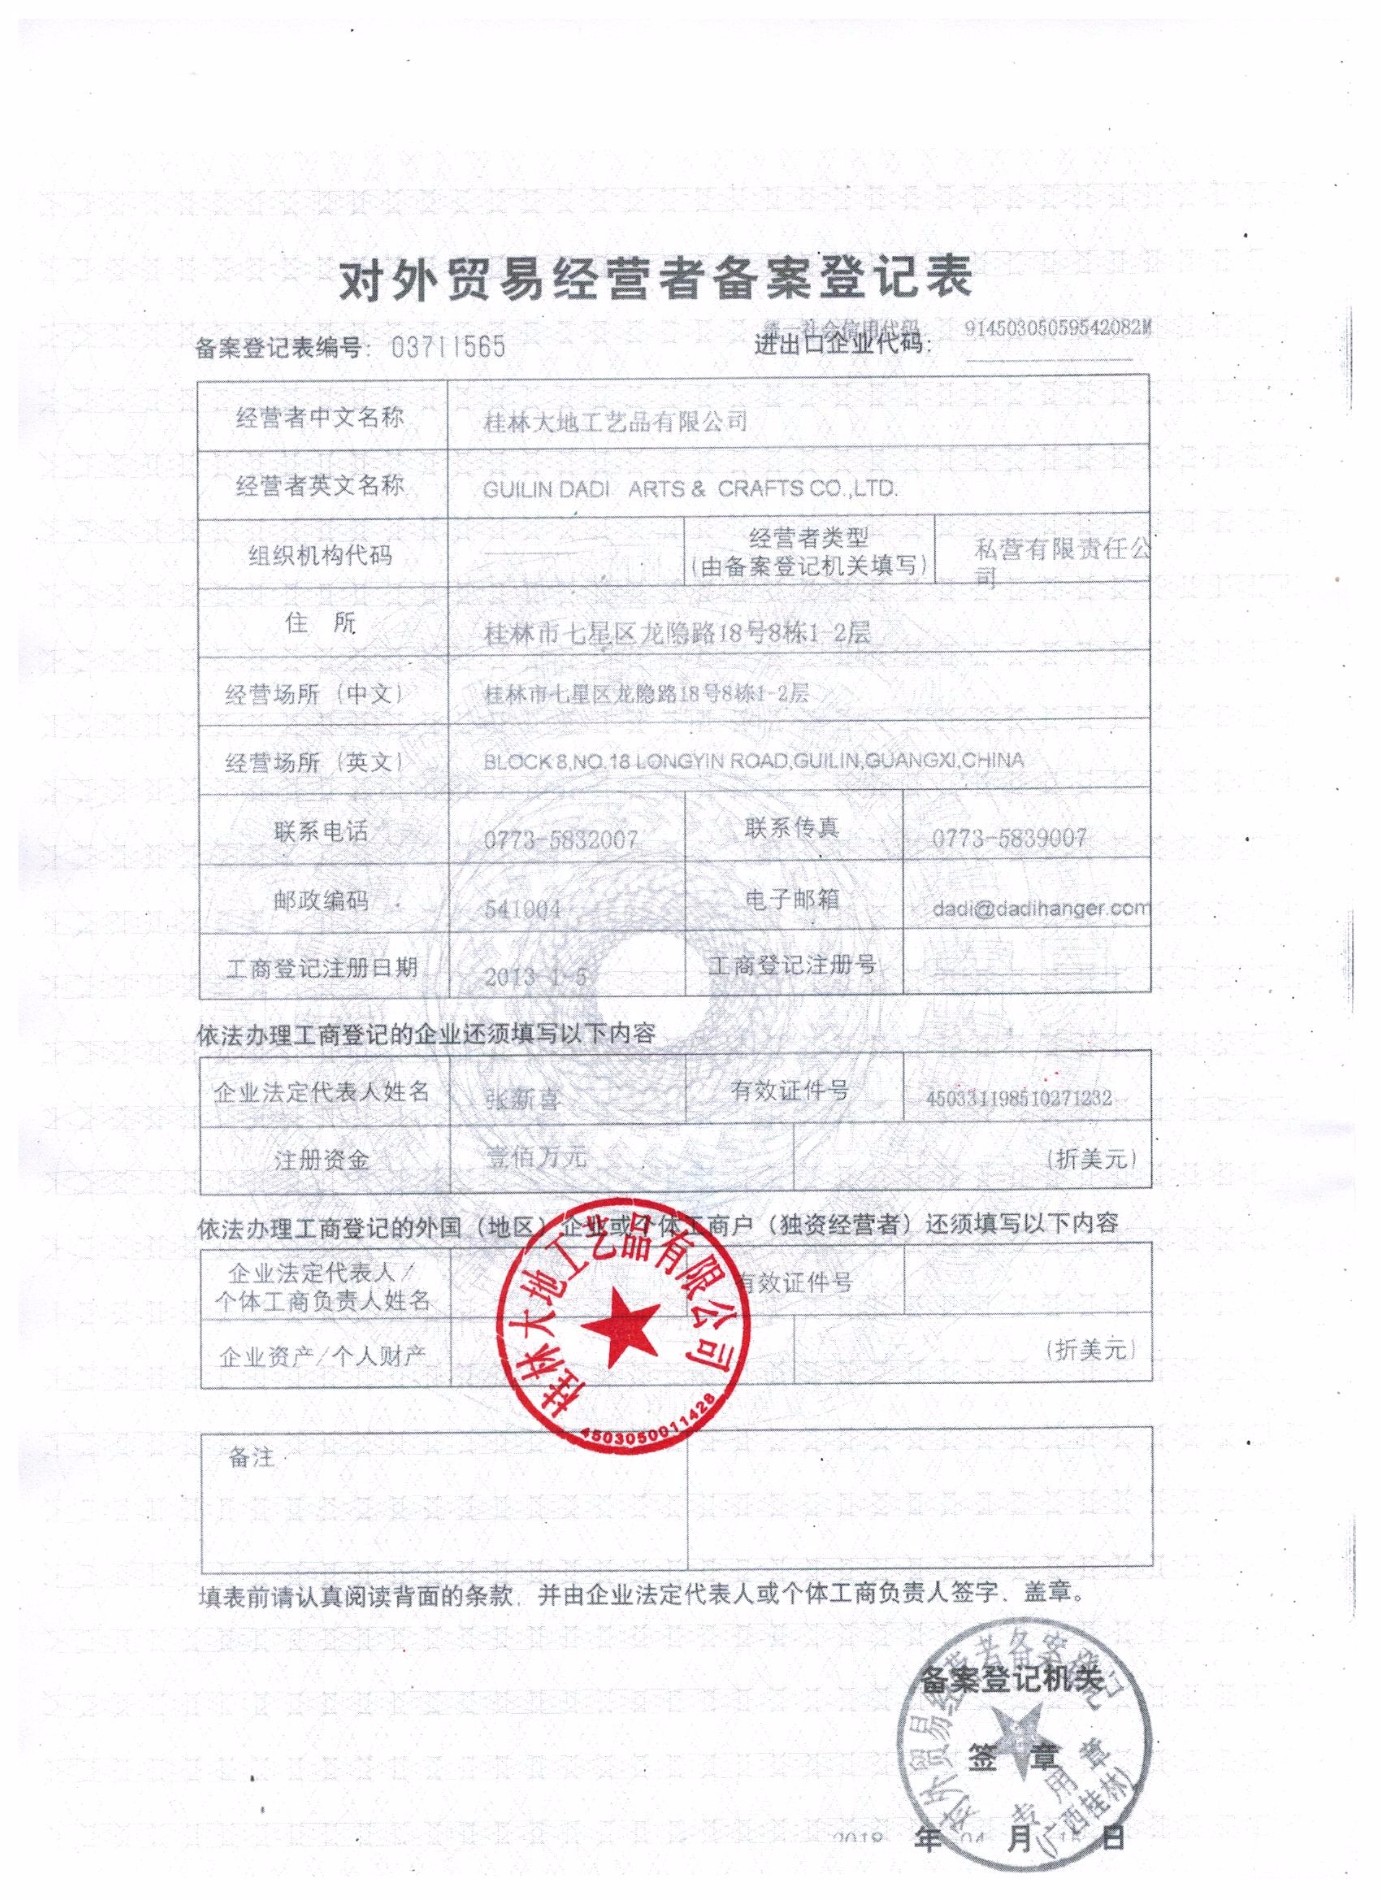 Foreign trade export certificate